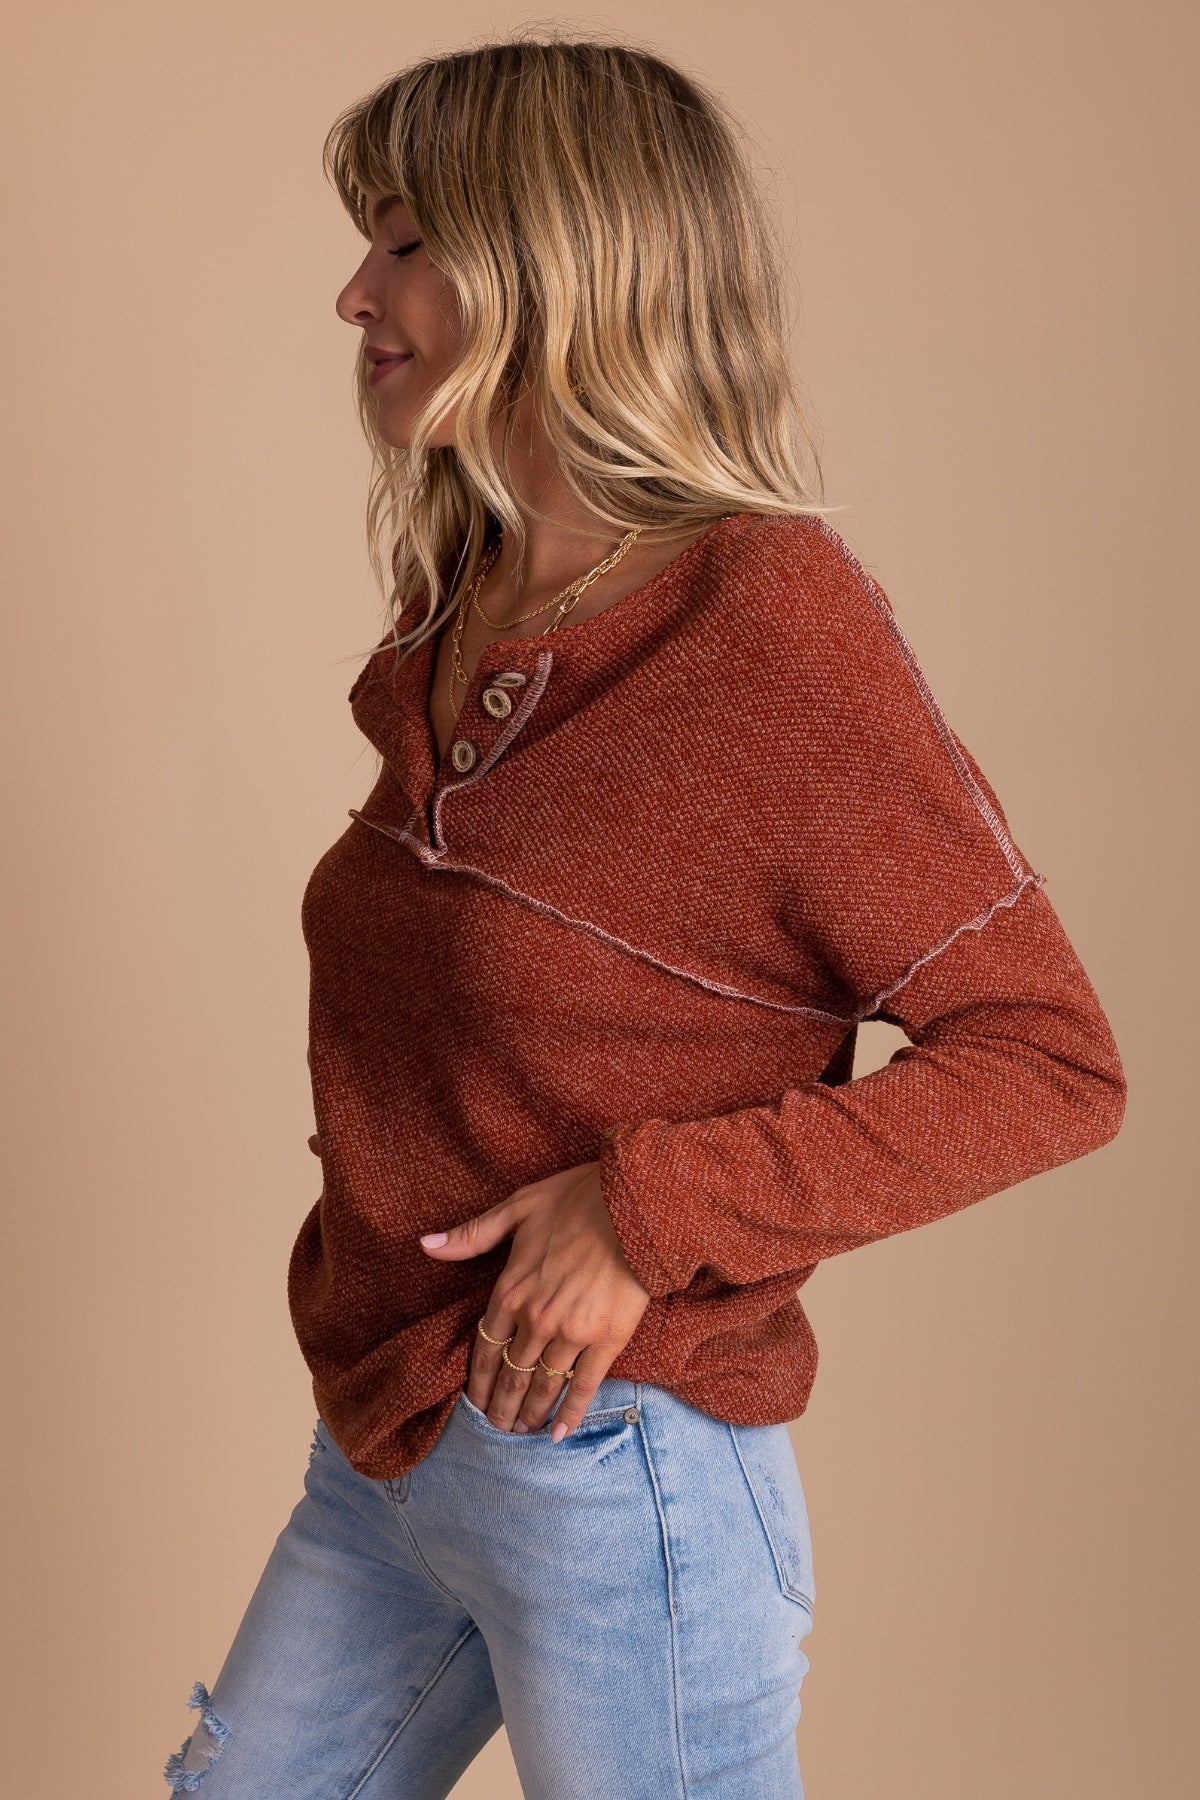 Rust Red Knit Top for Fall